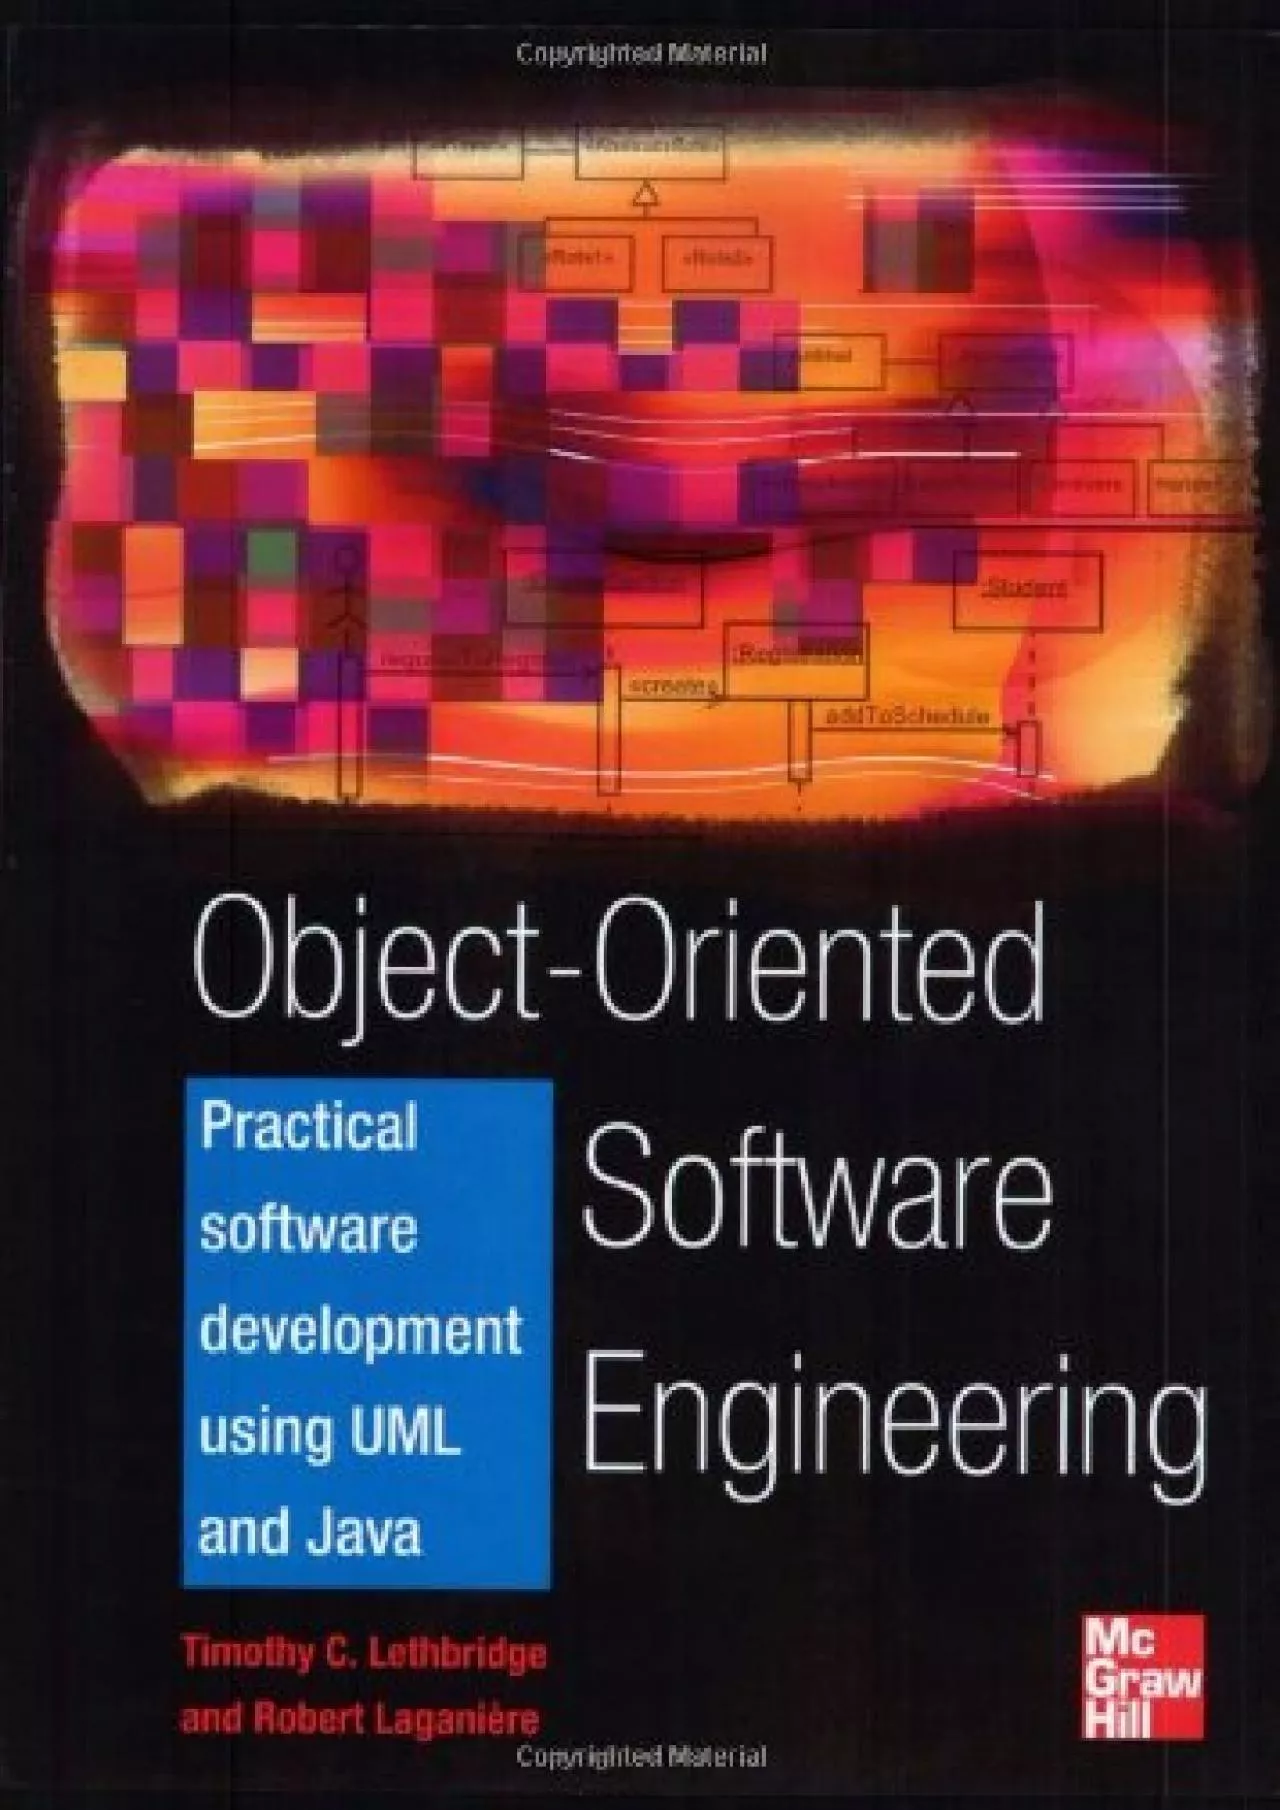 [READING BOOK]-Object-Oriented Software Engineering Practical Software Development using